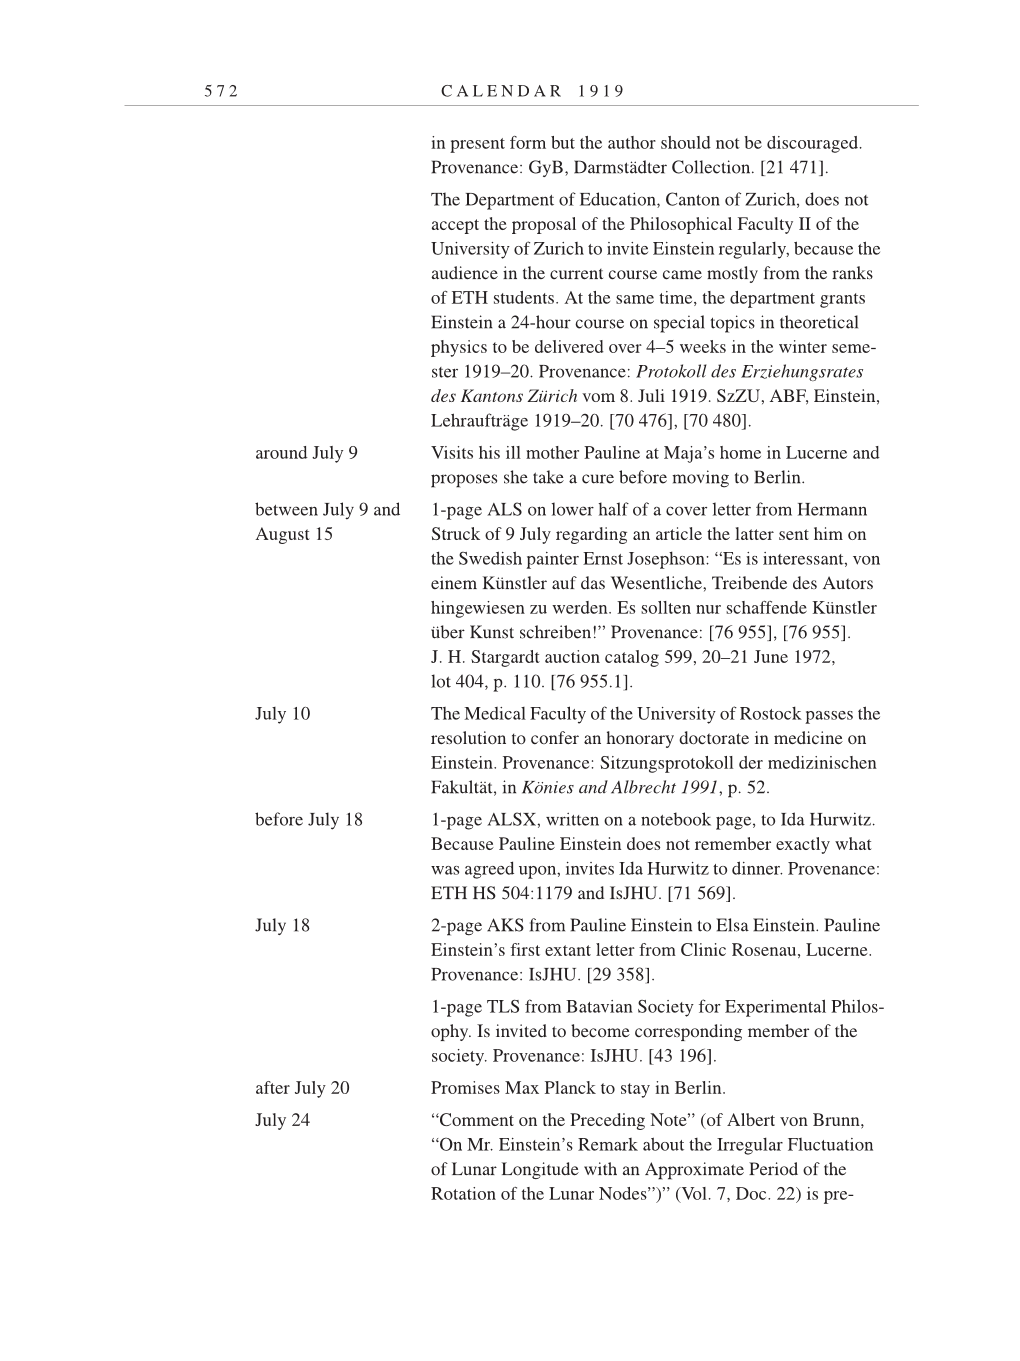 Volume 9: The Berlin Years: Correspondence January 1919-April 1920 page 572